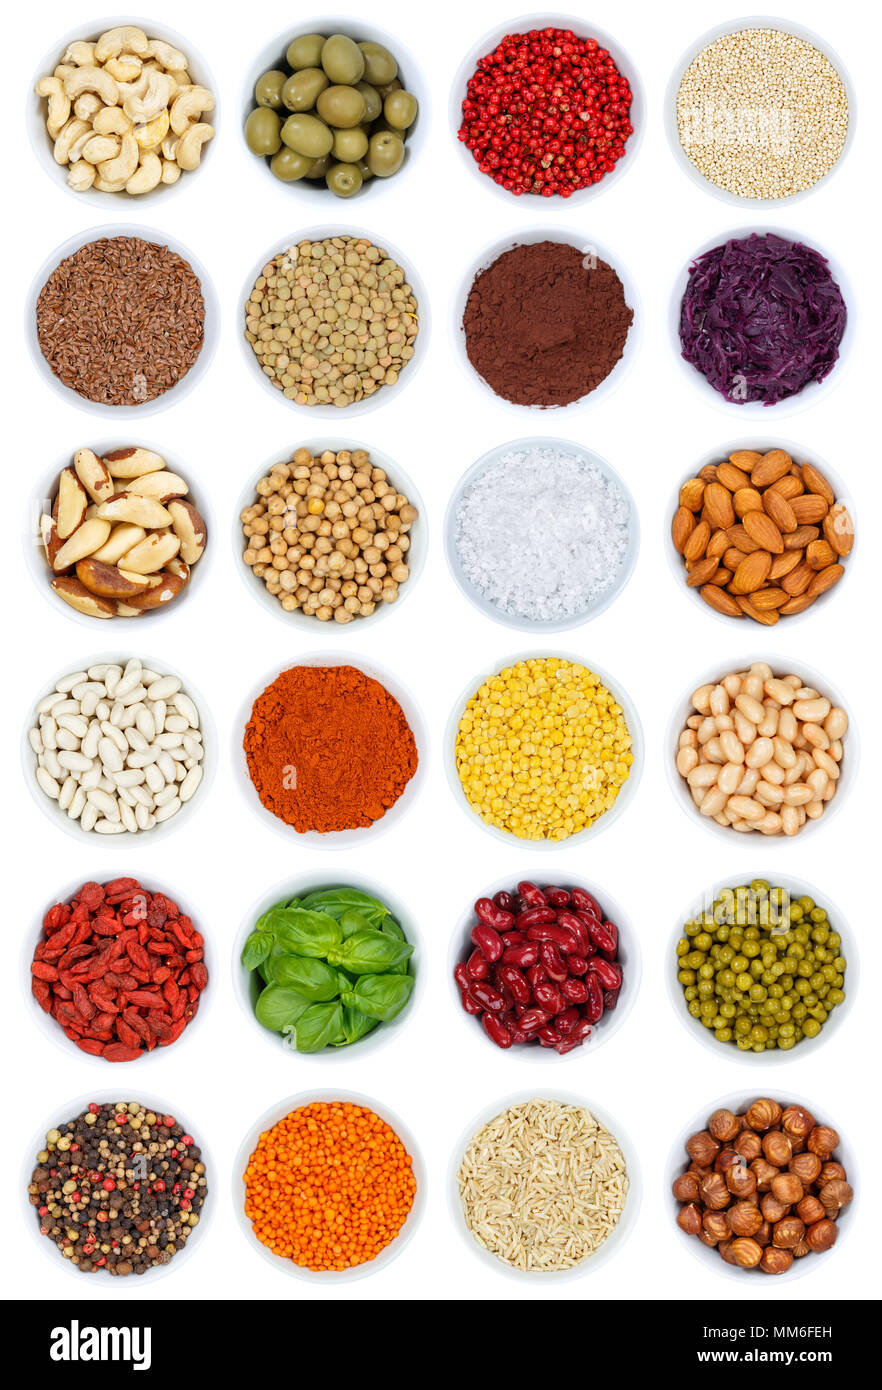 Collection of spices and herbs vegetables nuts portrait format from above bowl isolated on a white background Stock Photo